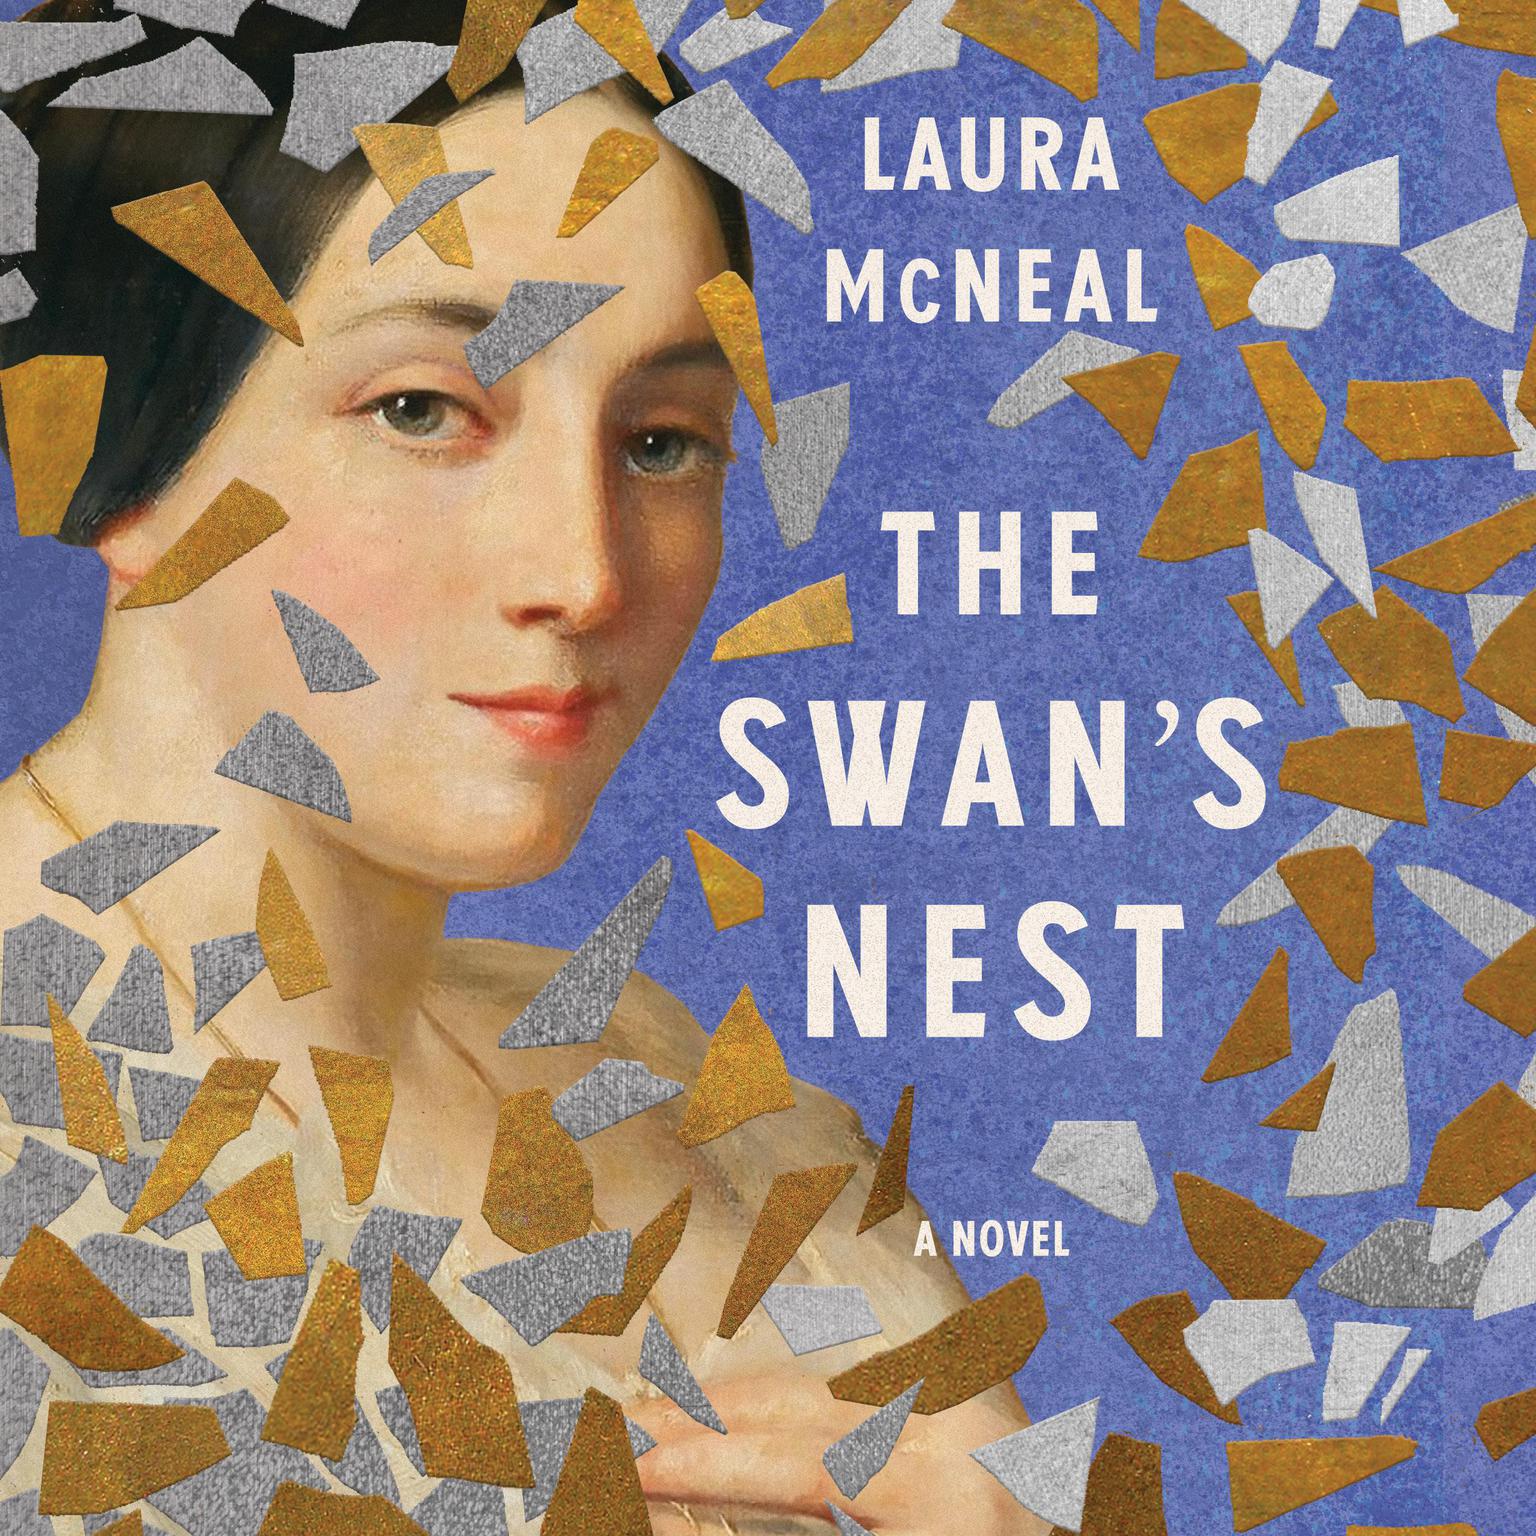 The Swans Nest: A Novel Audiobook, by Laura McNeal